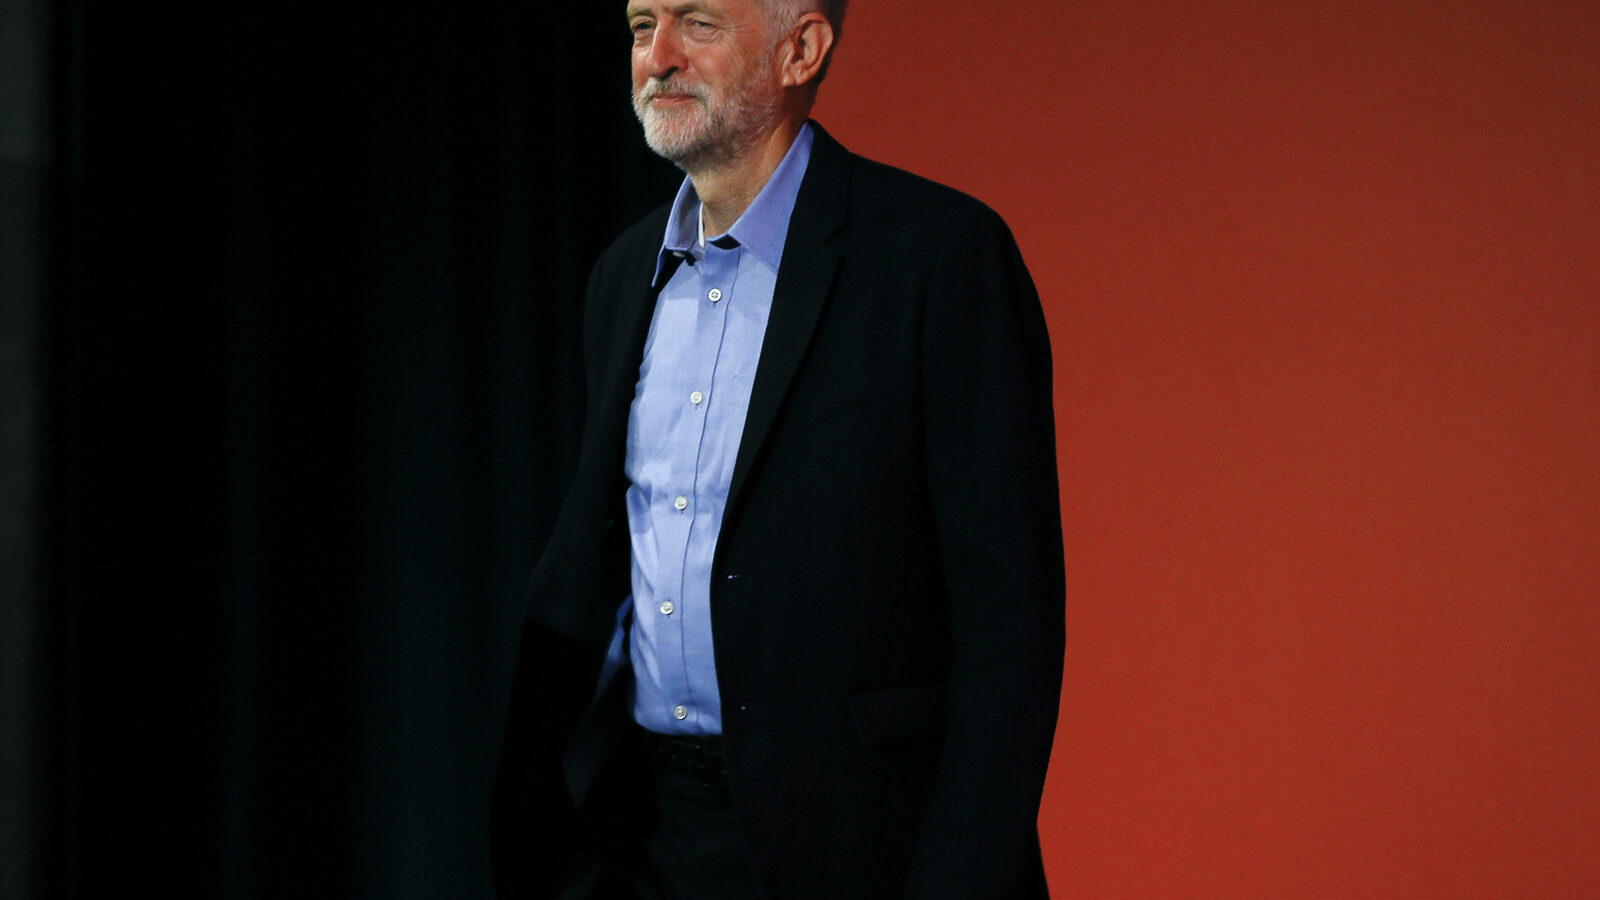 Jeremy Corbyn arrives at the Labour Party Leadership Conference in London, Saturday, Sept. 12, 2015. Corbyn will now lead Britain's main opposition party. (AP Photo/Kirsty Wigglesworth)